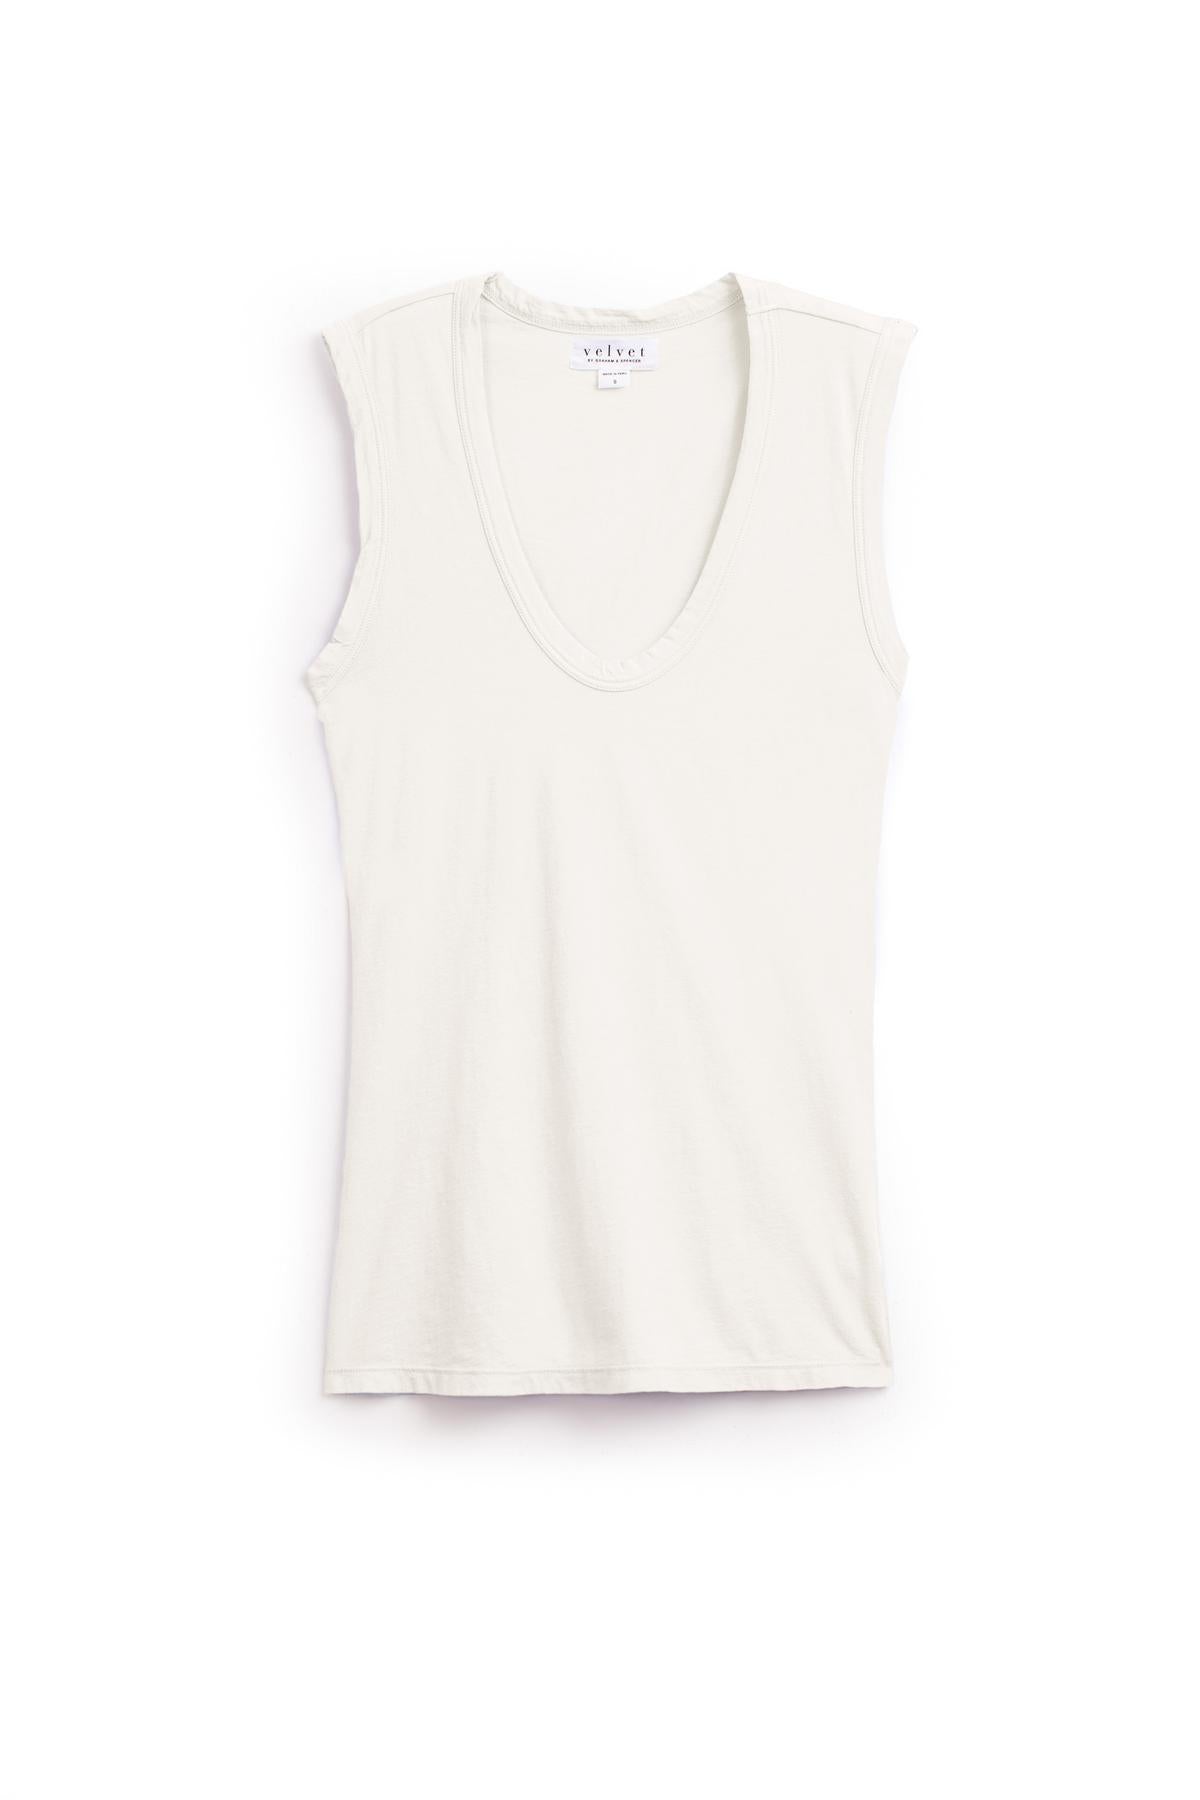 White sleeveless laid-back ESTINA TANK TOP with a low-scoop-neck on a plain white background. Brand label "Velvet by Graham & Spencer" visible at the neckline, crafted from soft gauzy whisper fabric for ultimate comfort.-36131064217793